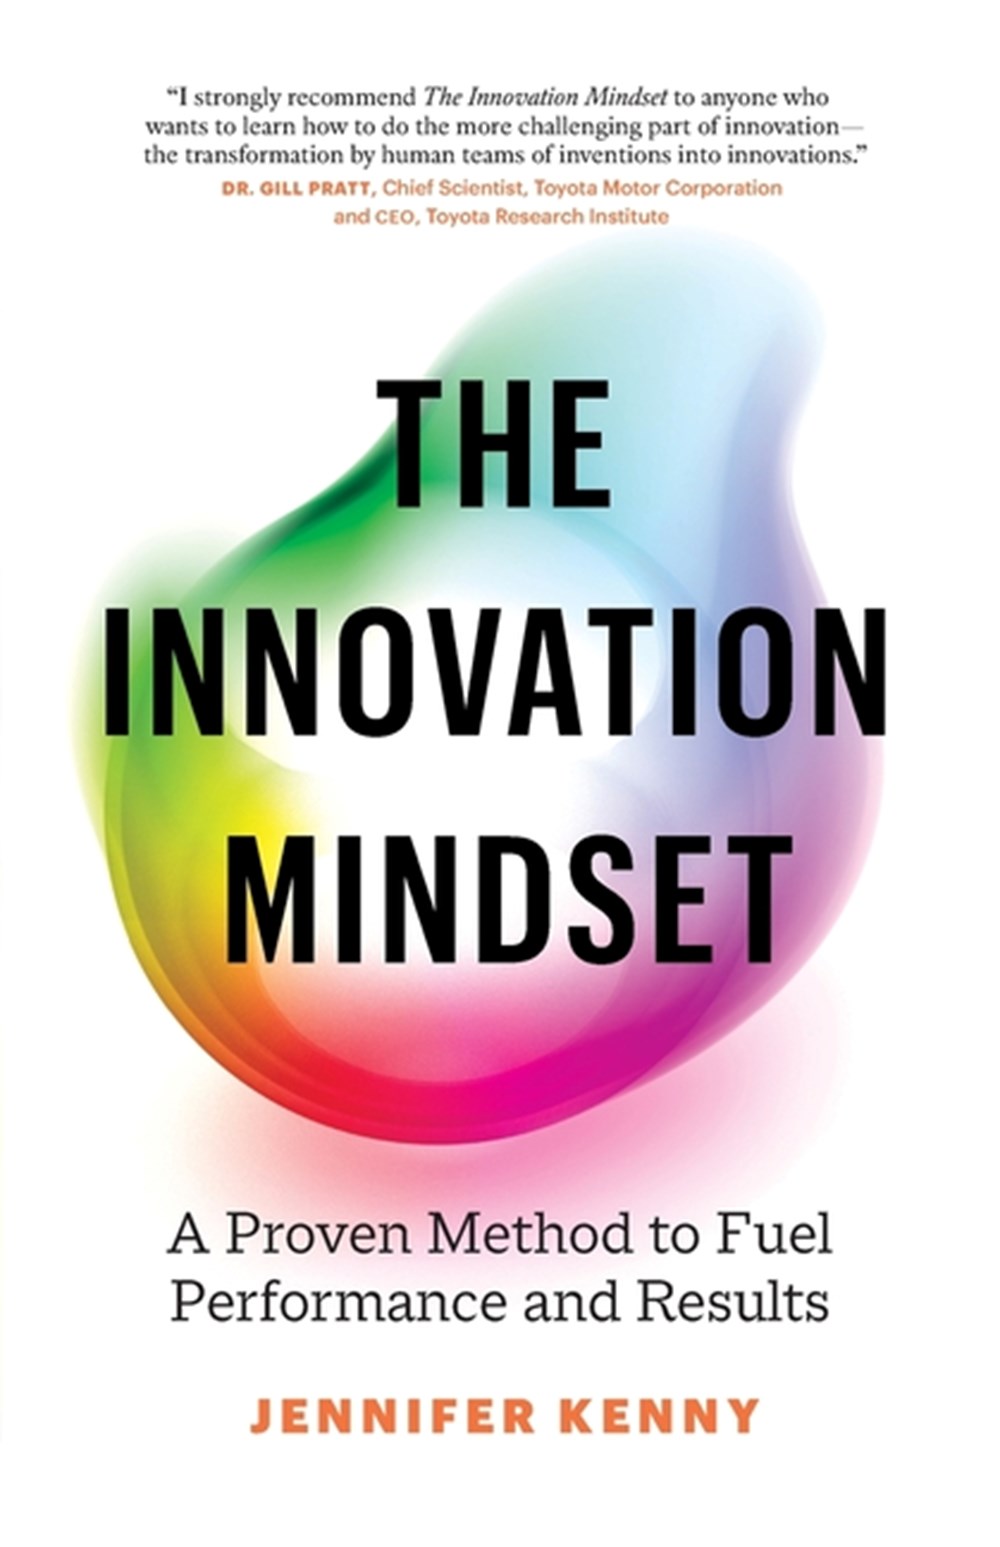 Innovation Mindset: A Proven Method to Fuel Performance and Results